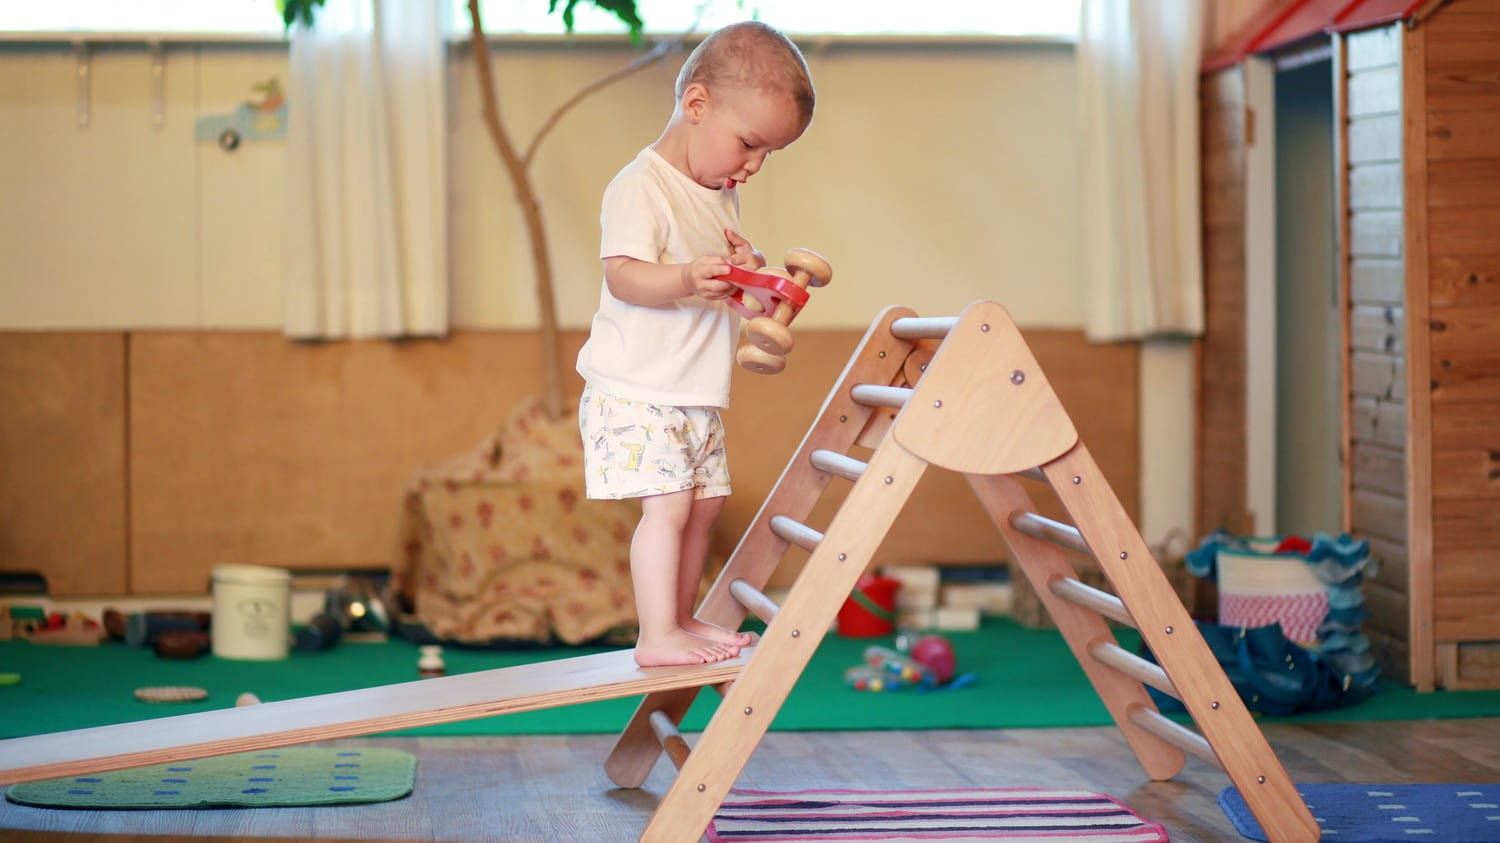 A wooden Pikler triangle, a climbing structure for children, with colorful rungs and a child happily climbing on it.